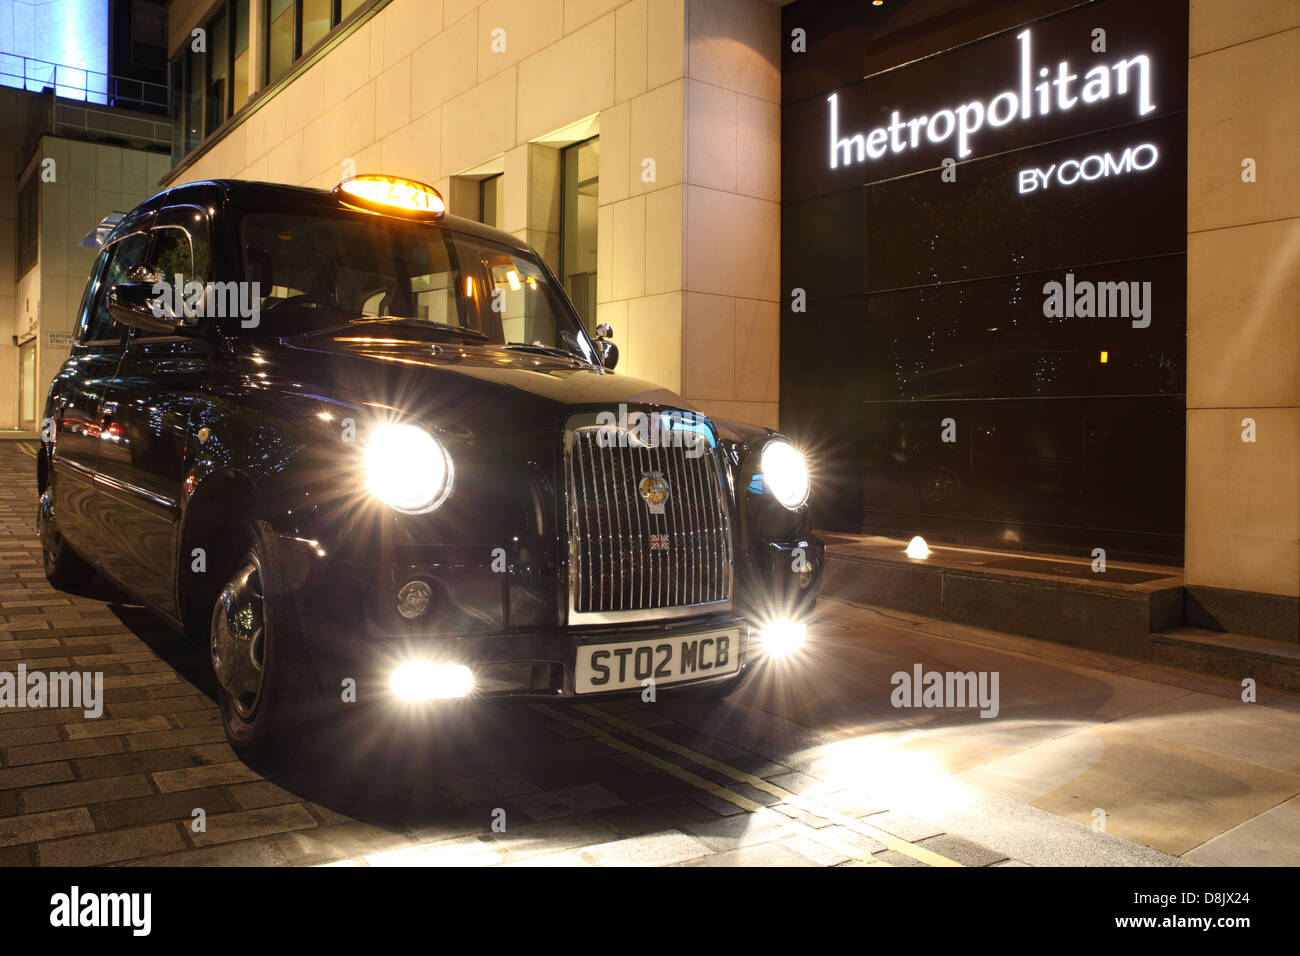 London Taxi, Black Cab, parked in the forecourt of the Metropolitan Hotel Mayfair Stock Photo